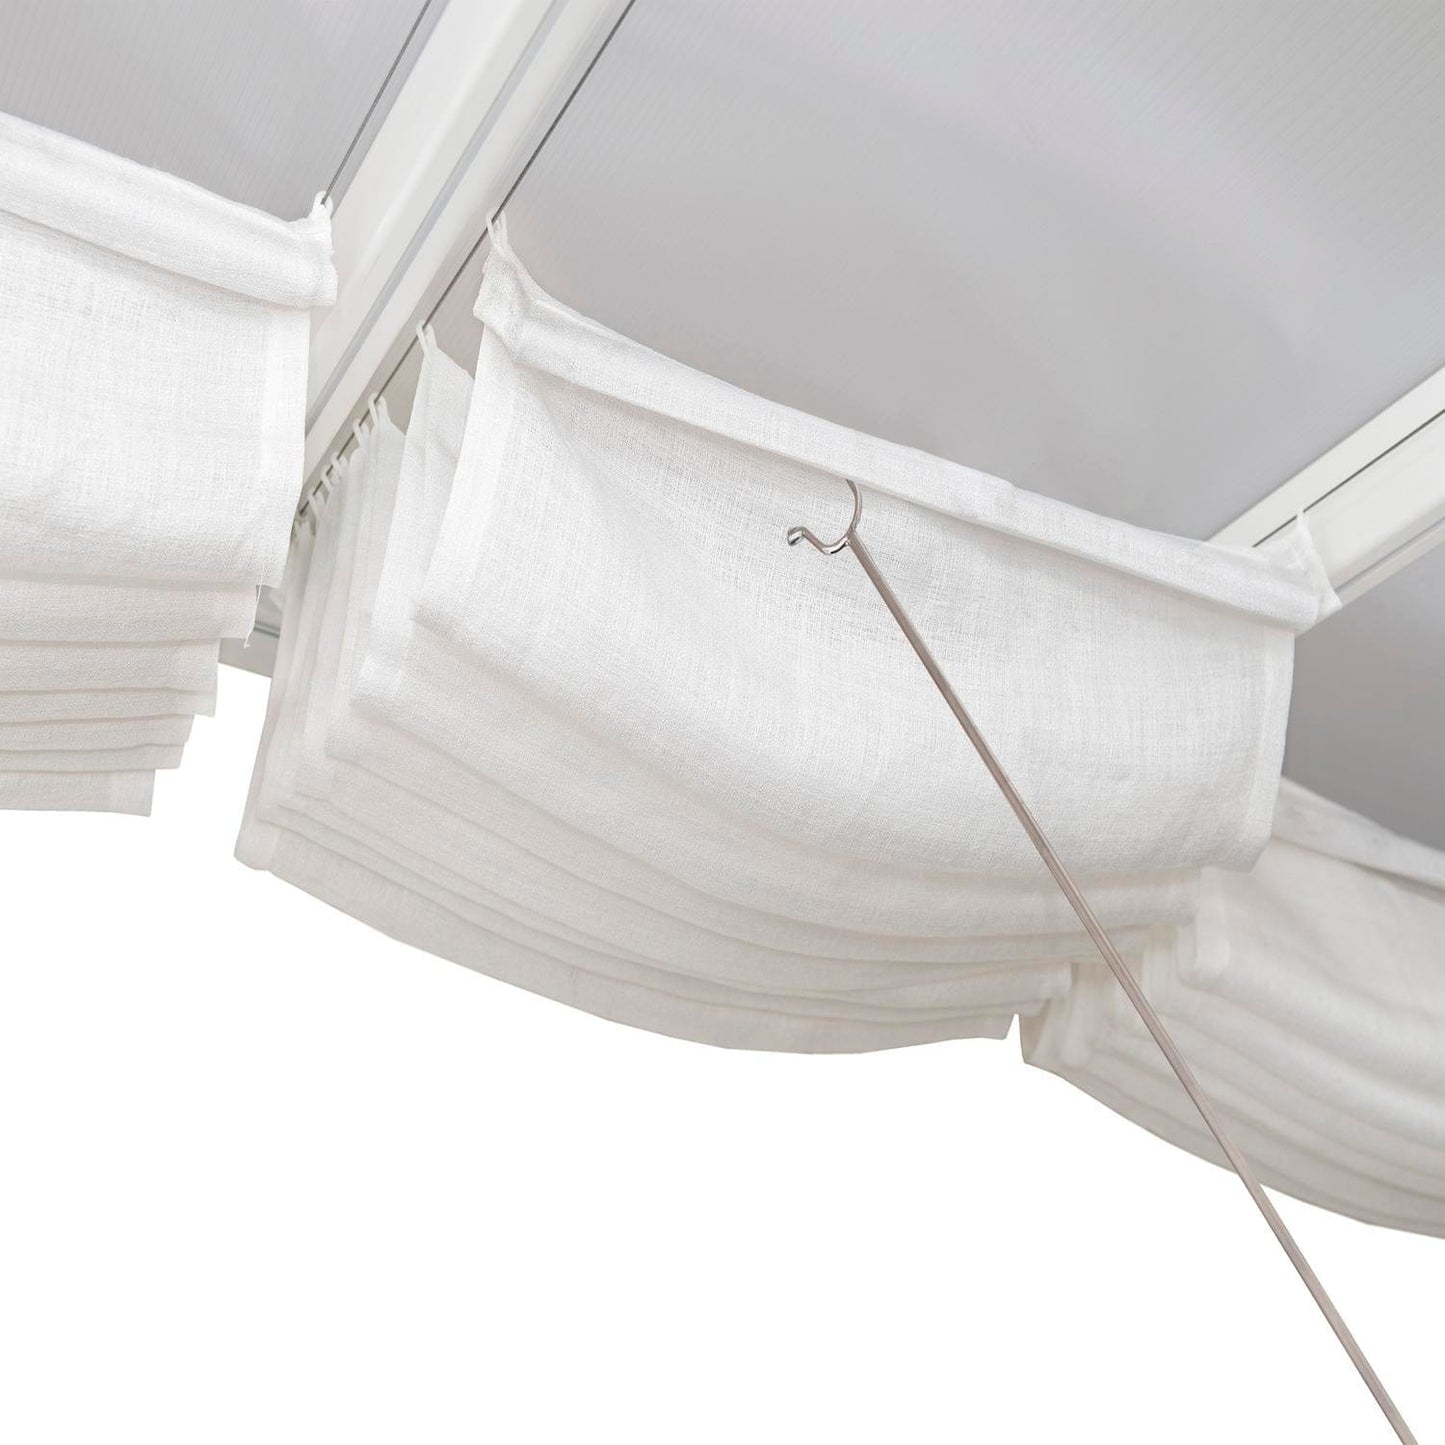 Palram - Canopia Patio Cover Accessories Palram - Canopia | Patio Cover Blinds 10x30 ft - White HG1077